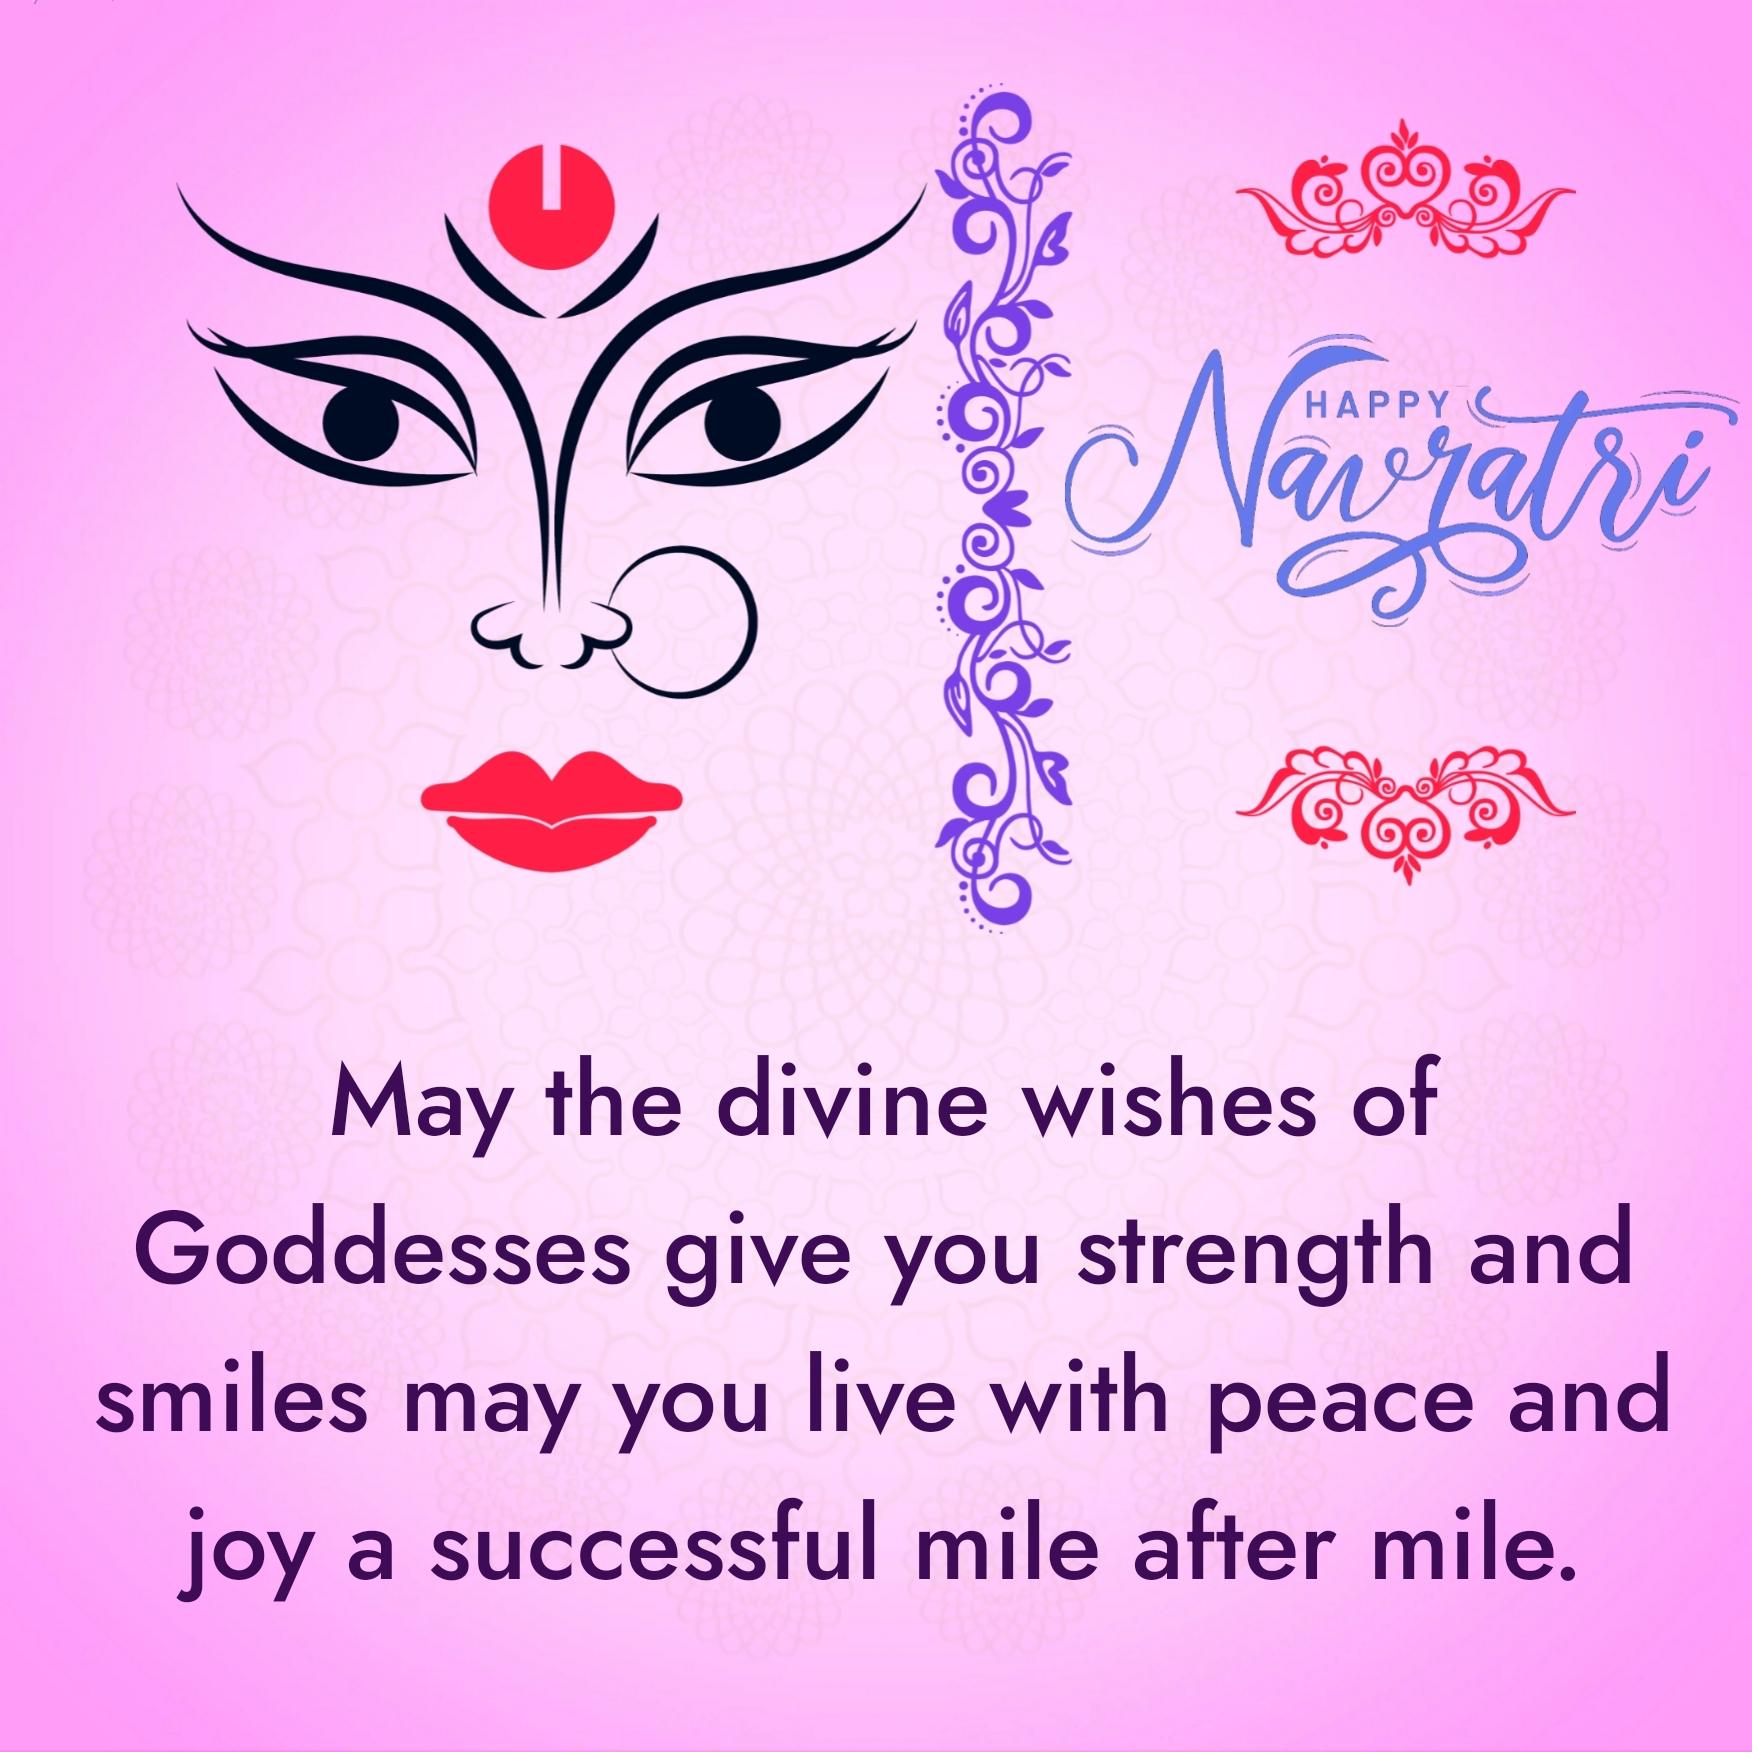 May the divine wishes of Goddesses give you strength